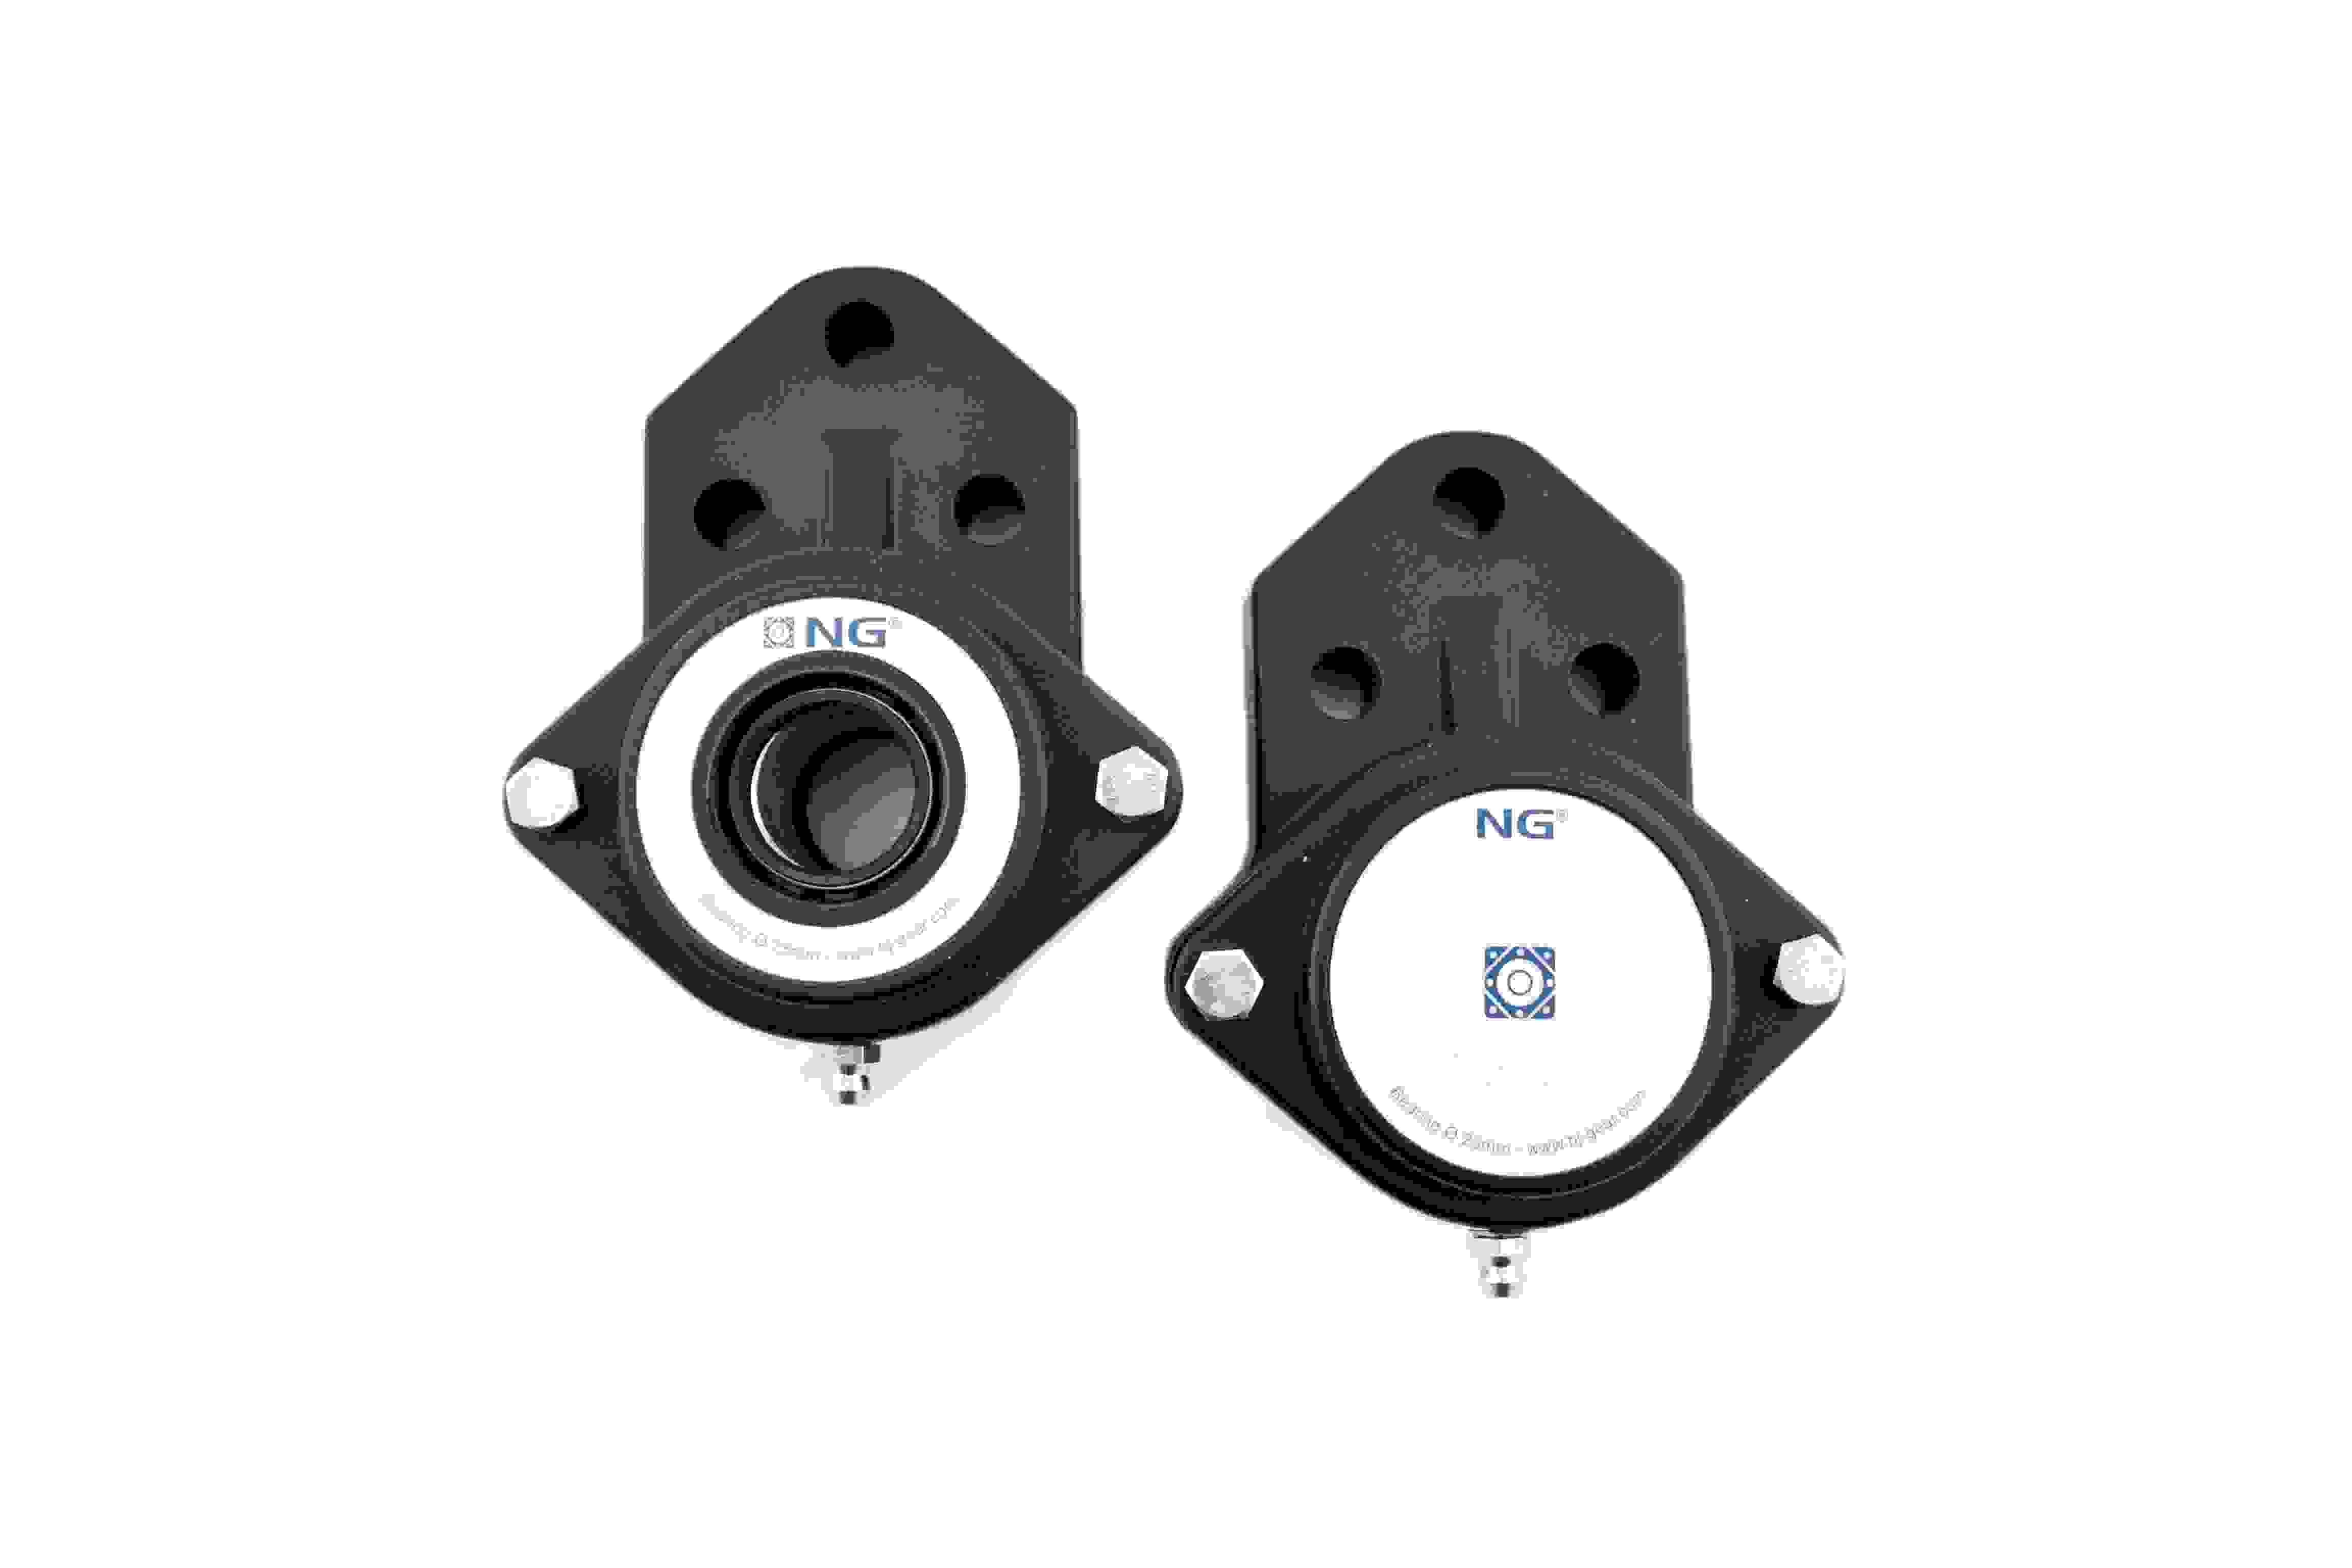 Two F3 3-bolt flange bearings  with open and closed covers on transparent background